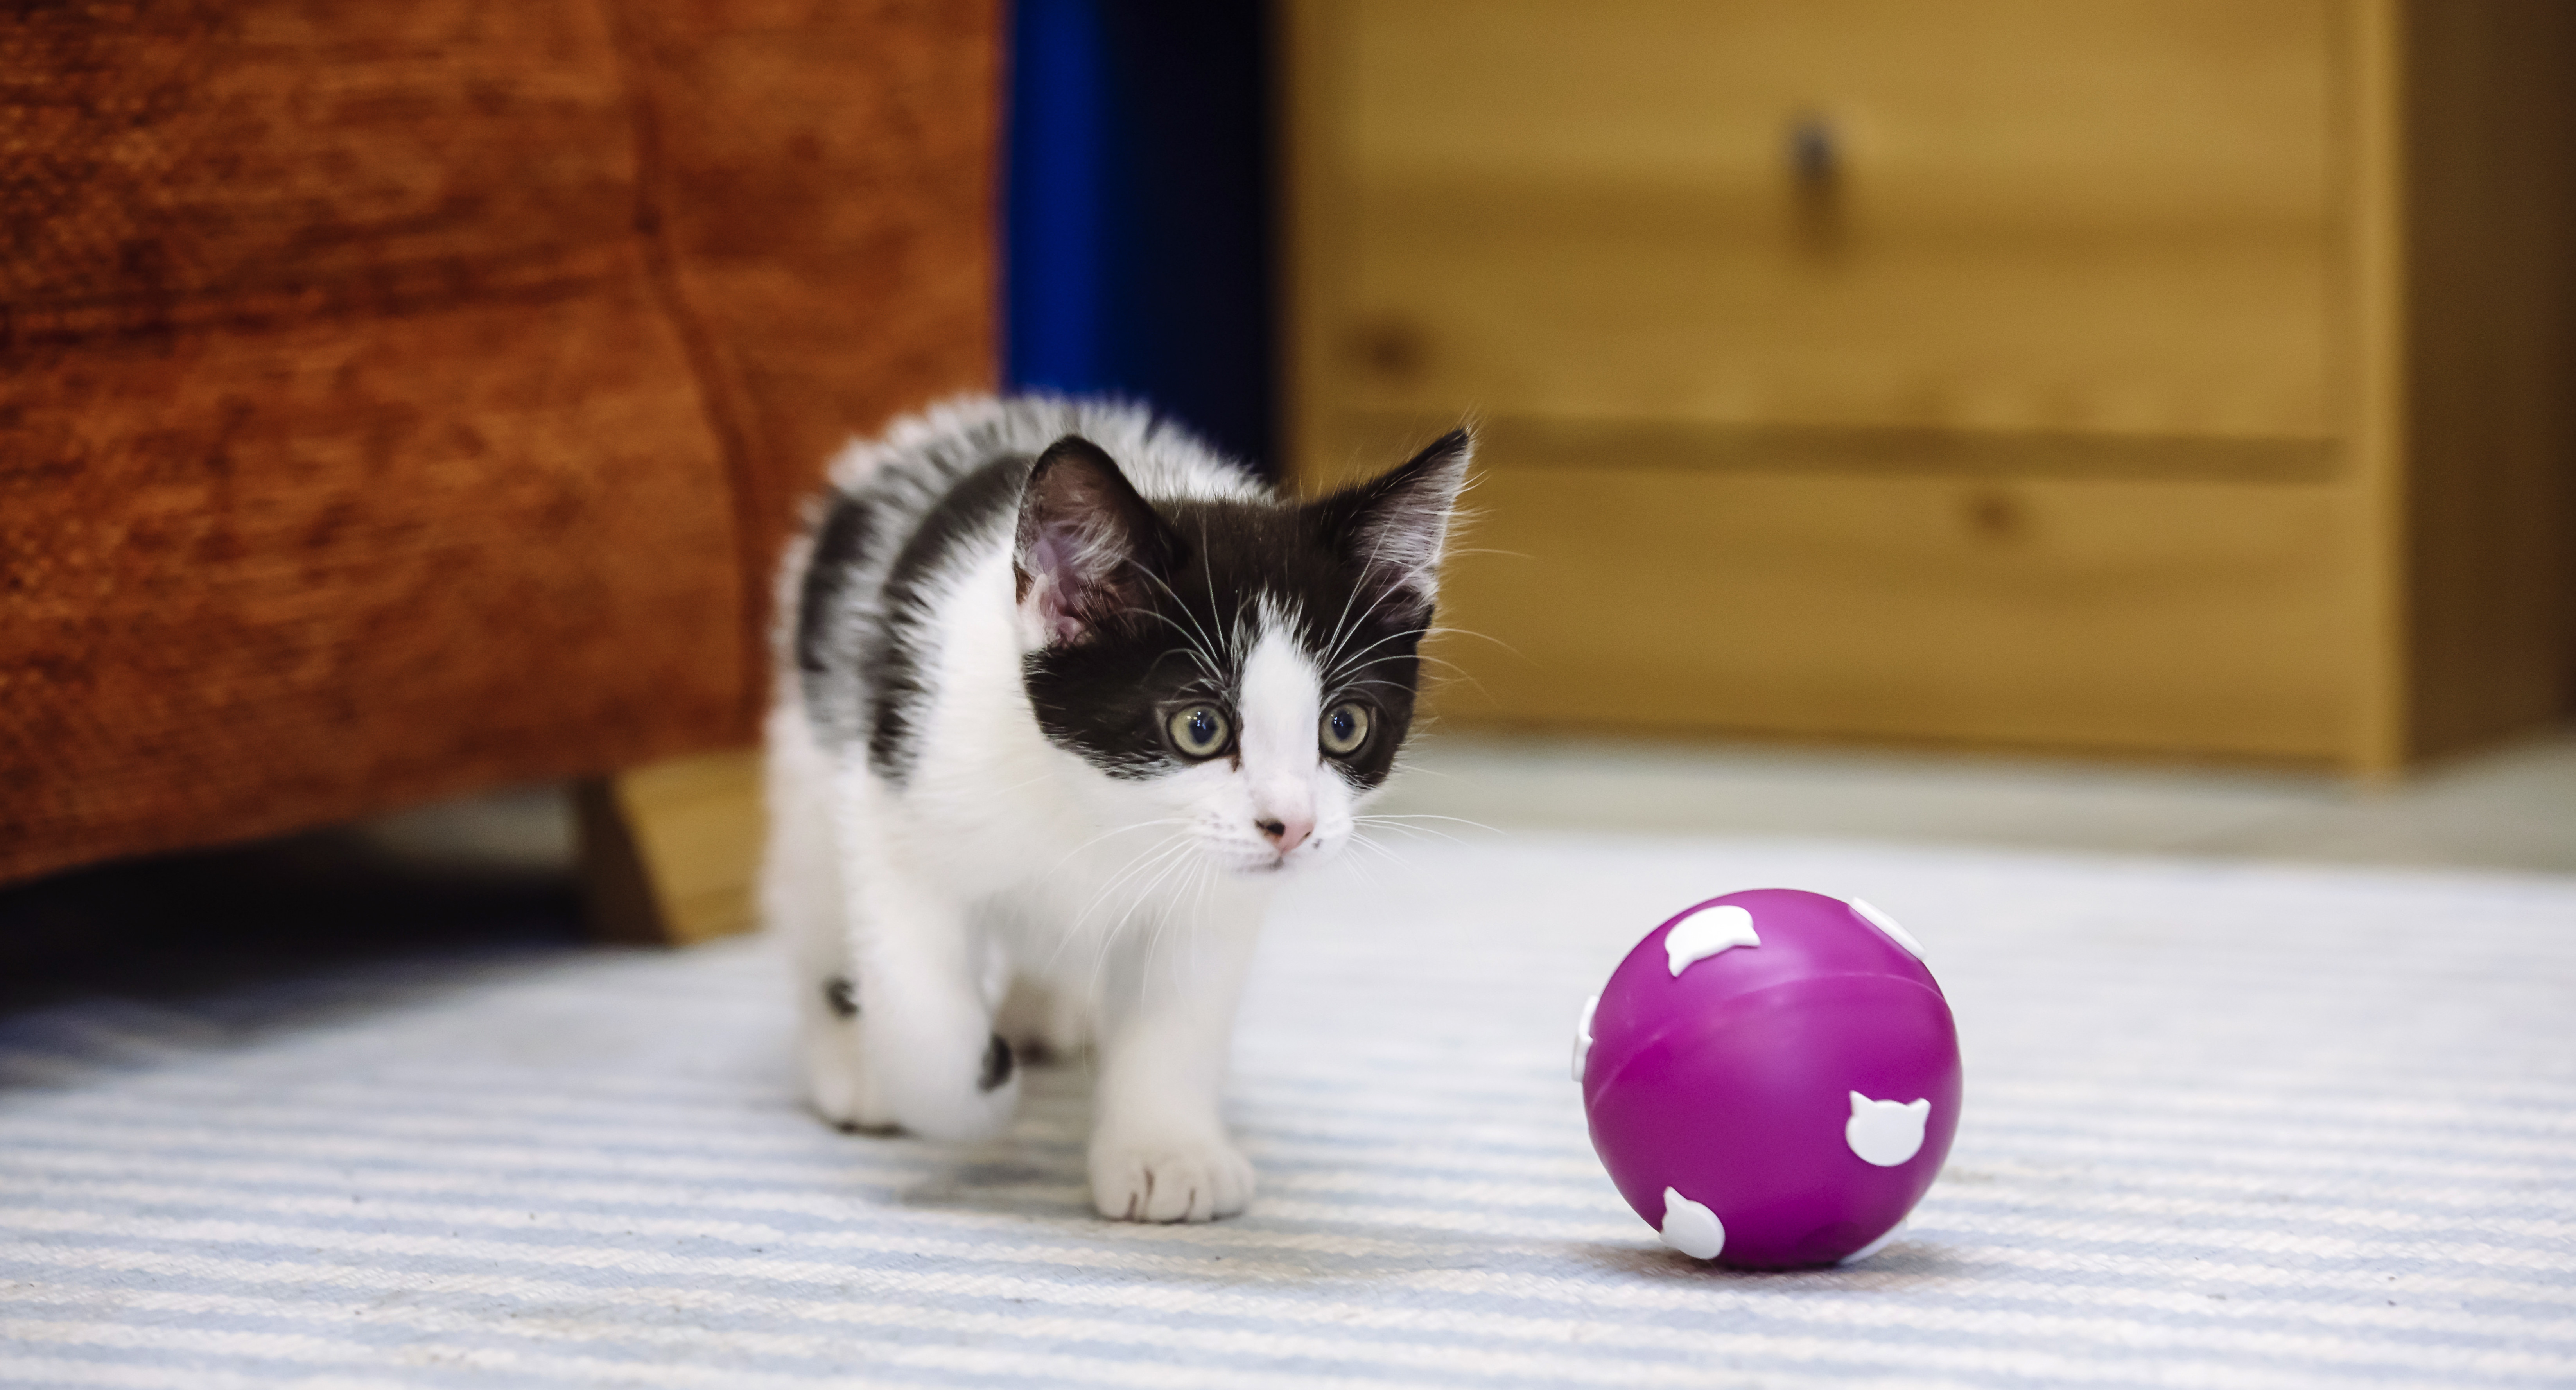 A black and white kitten stalks a purple ball getting ready to pounce